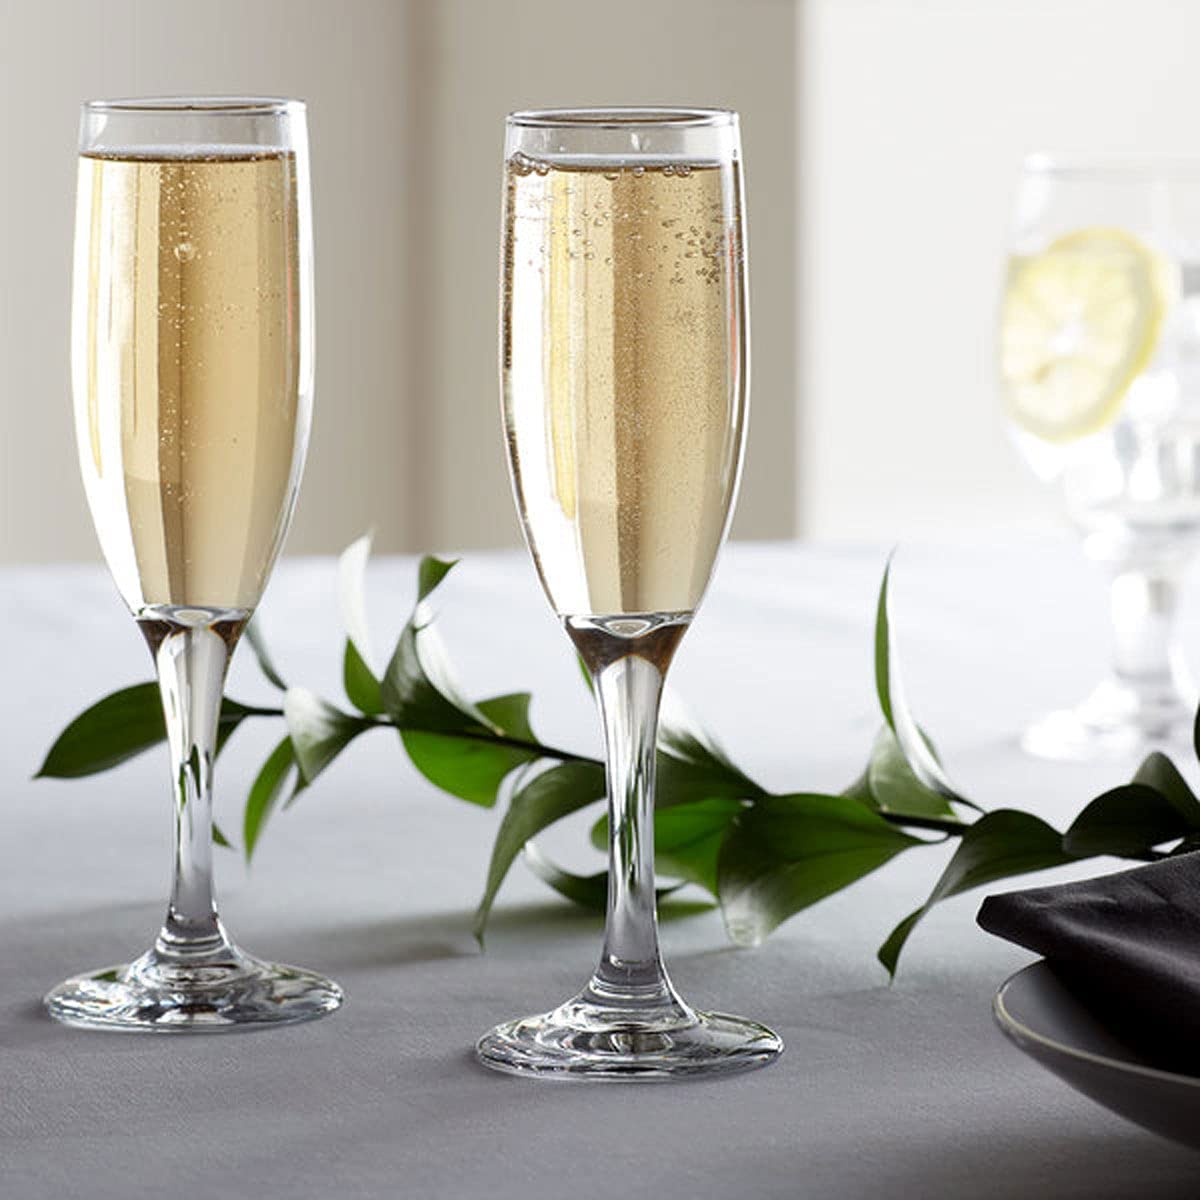 Buy Monogram Champagne Flute Glass Personalized Mimosa glasses